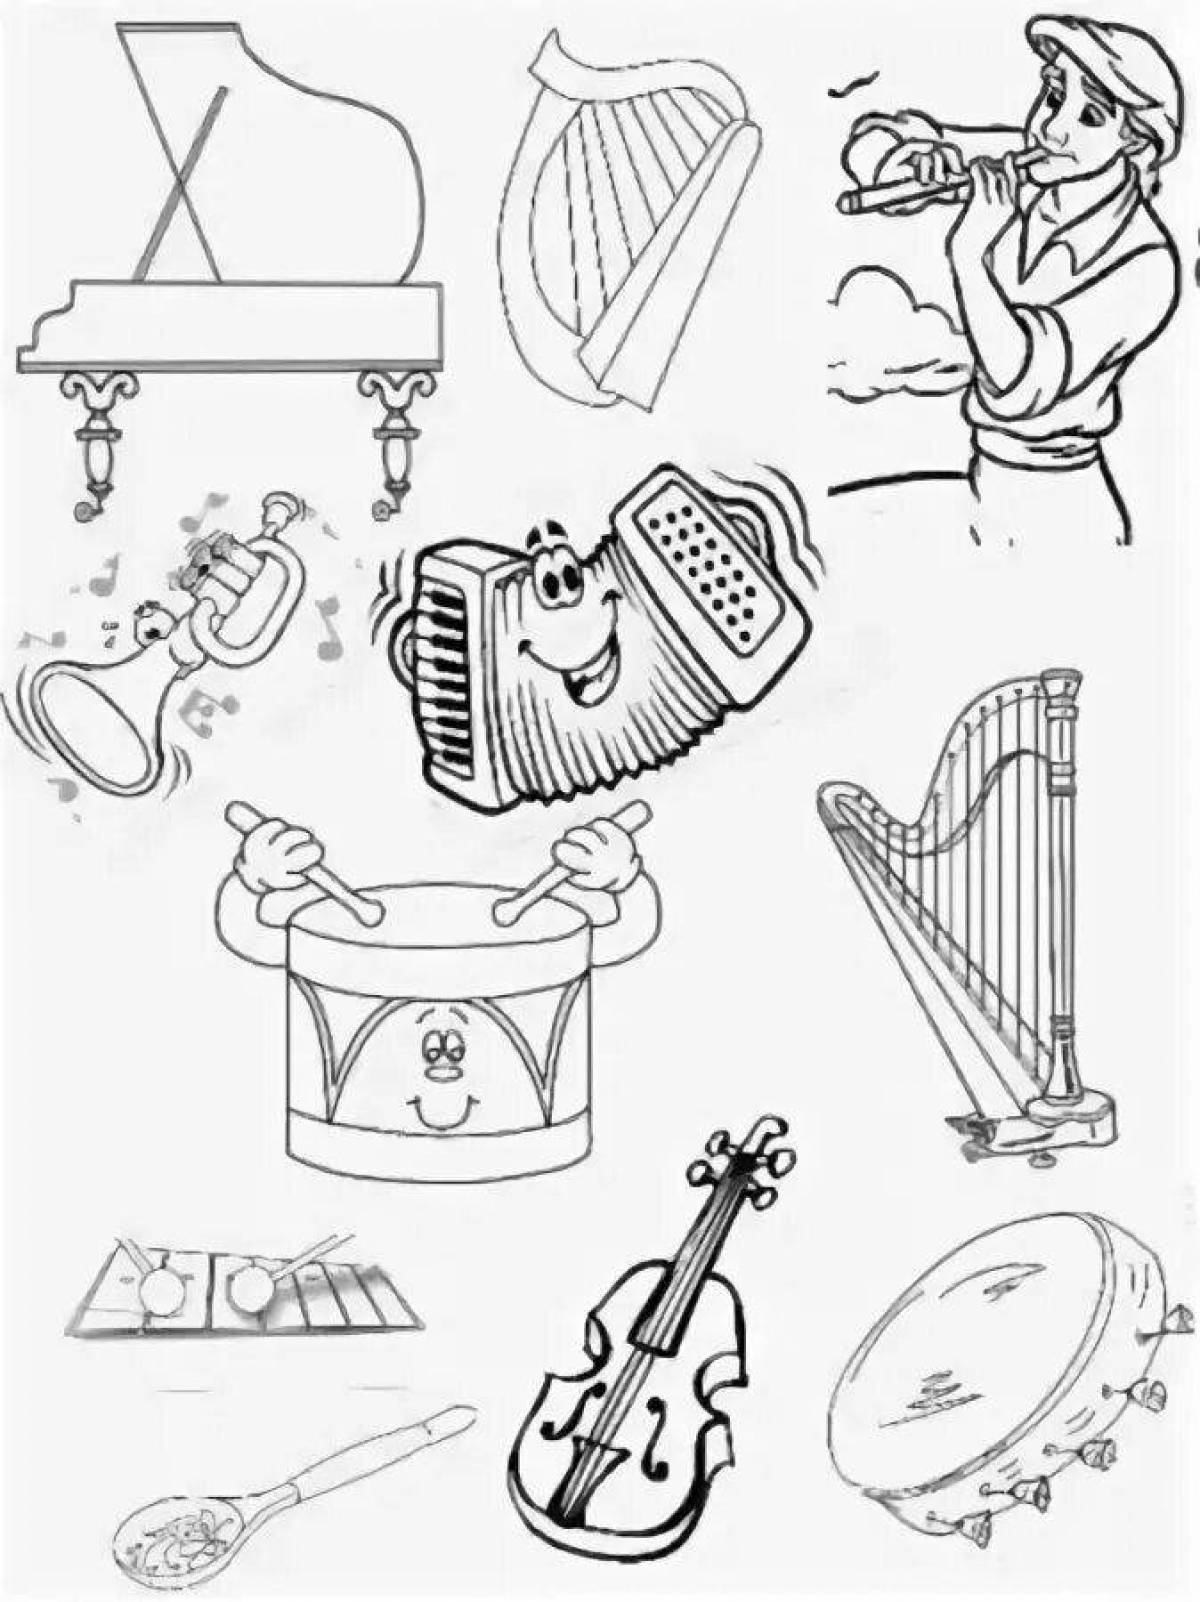 Amazing Russian folk musical instruments coloring page